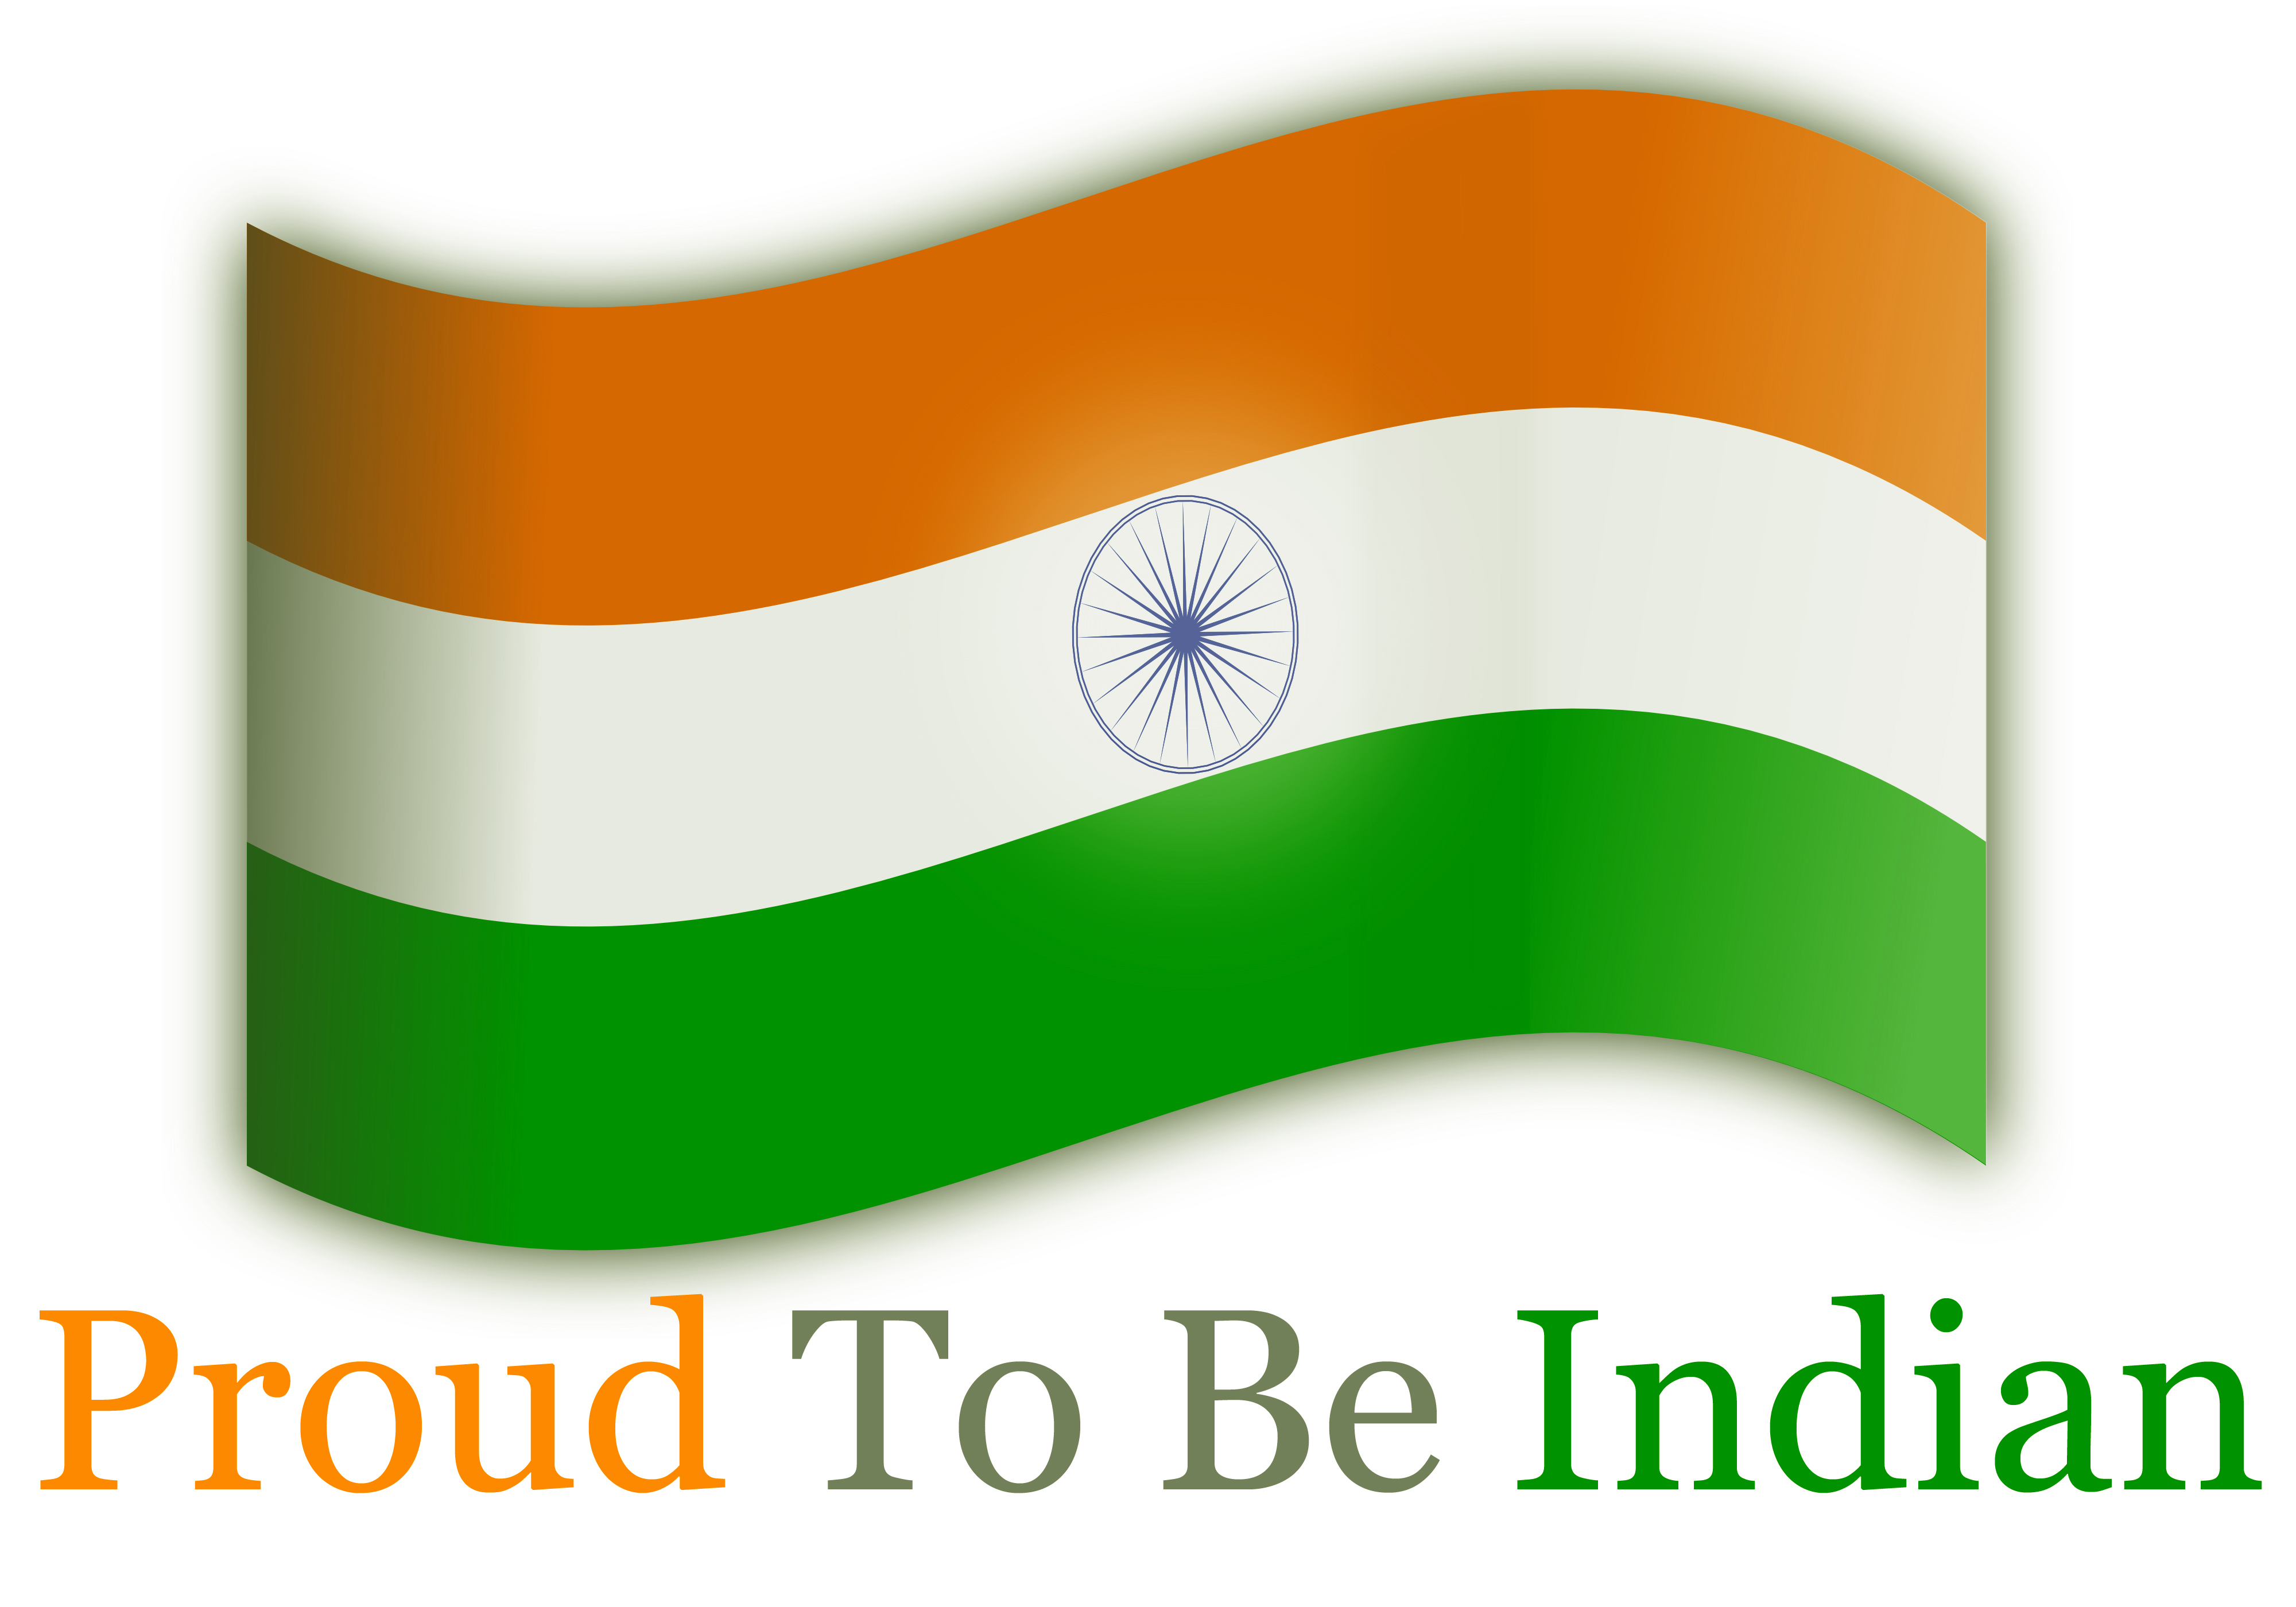 New} Indian Flag HD Wallpapers Images 2021 - Happy Independence Day